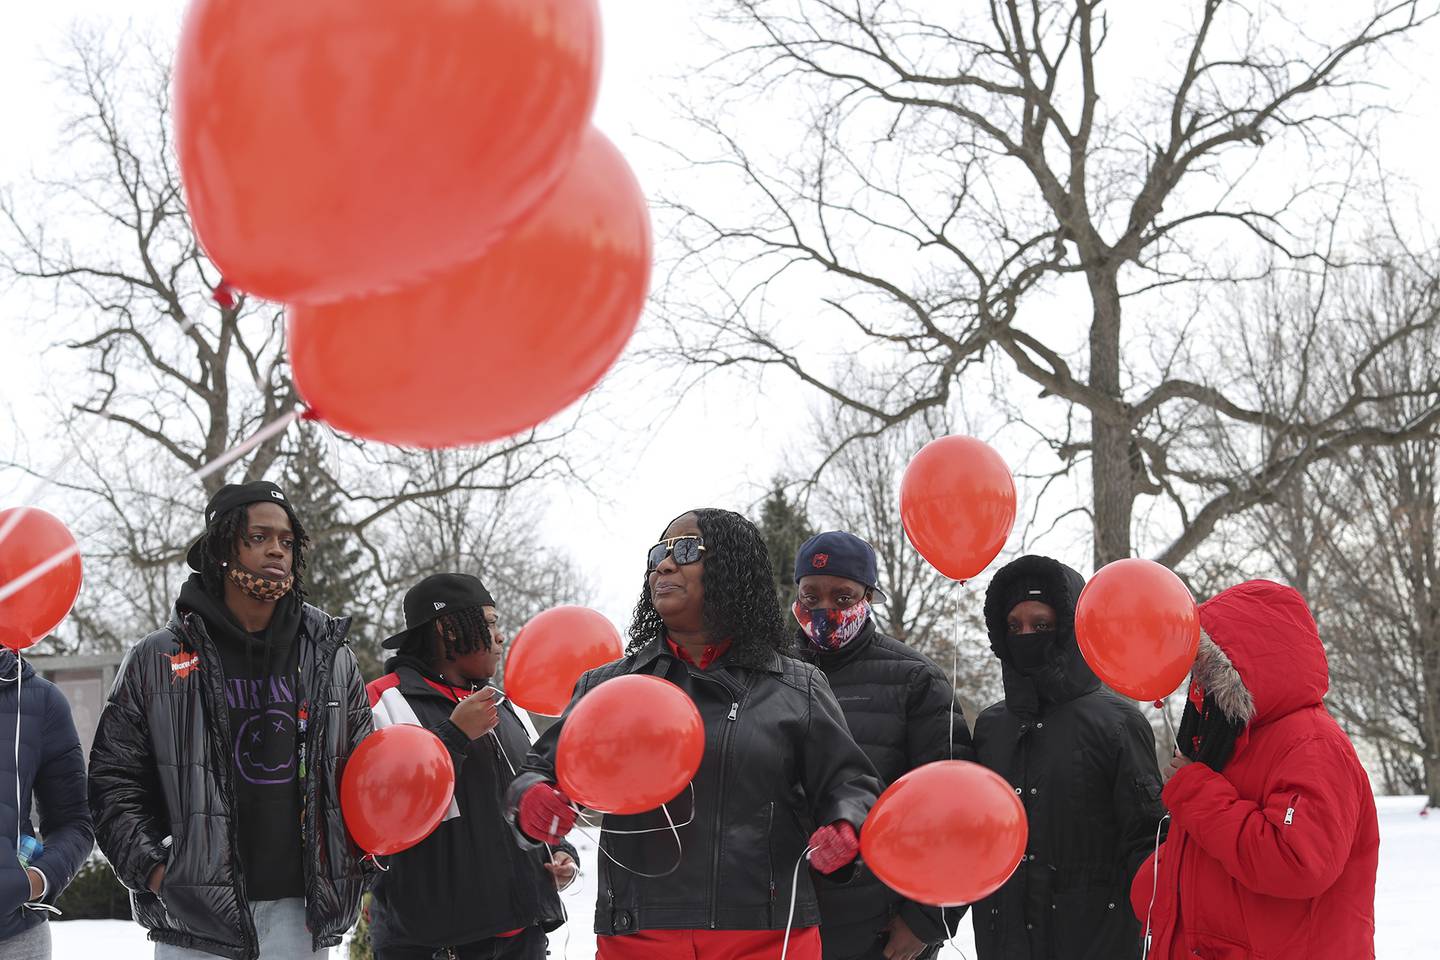 Nicole Lurry, widow of Eric Lurry, who died while in police custody last year, releases red balloons in his honor on Friday, Jan. 29, 2021, at Elmhurst Cemetery in Joliet, Ill. Friends and family held a vigil on the one year anniversary of the death of Eric Lurry.